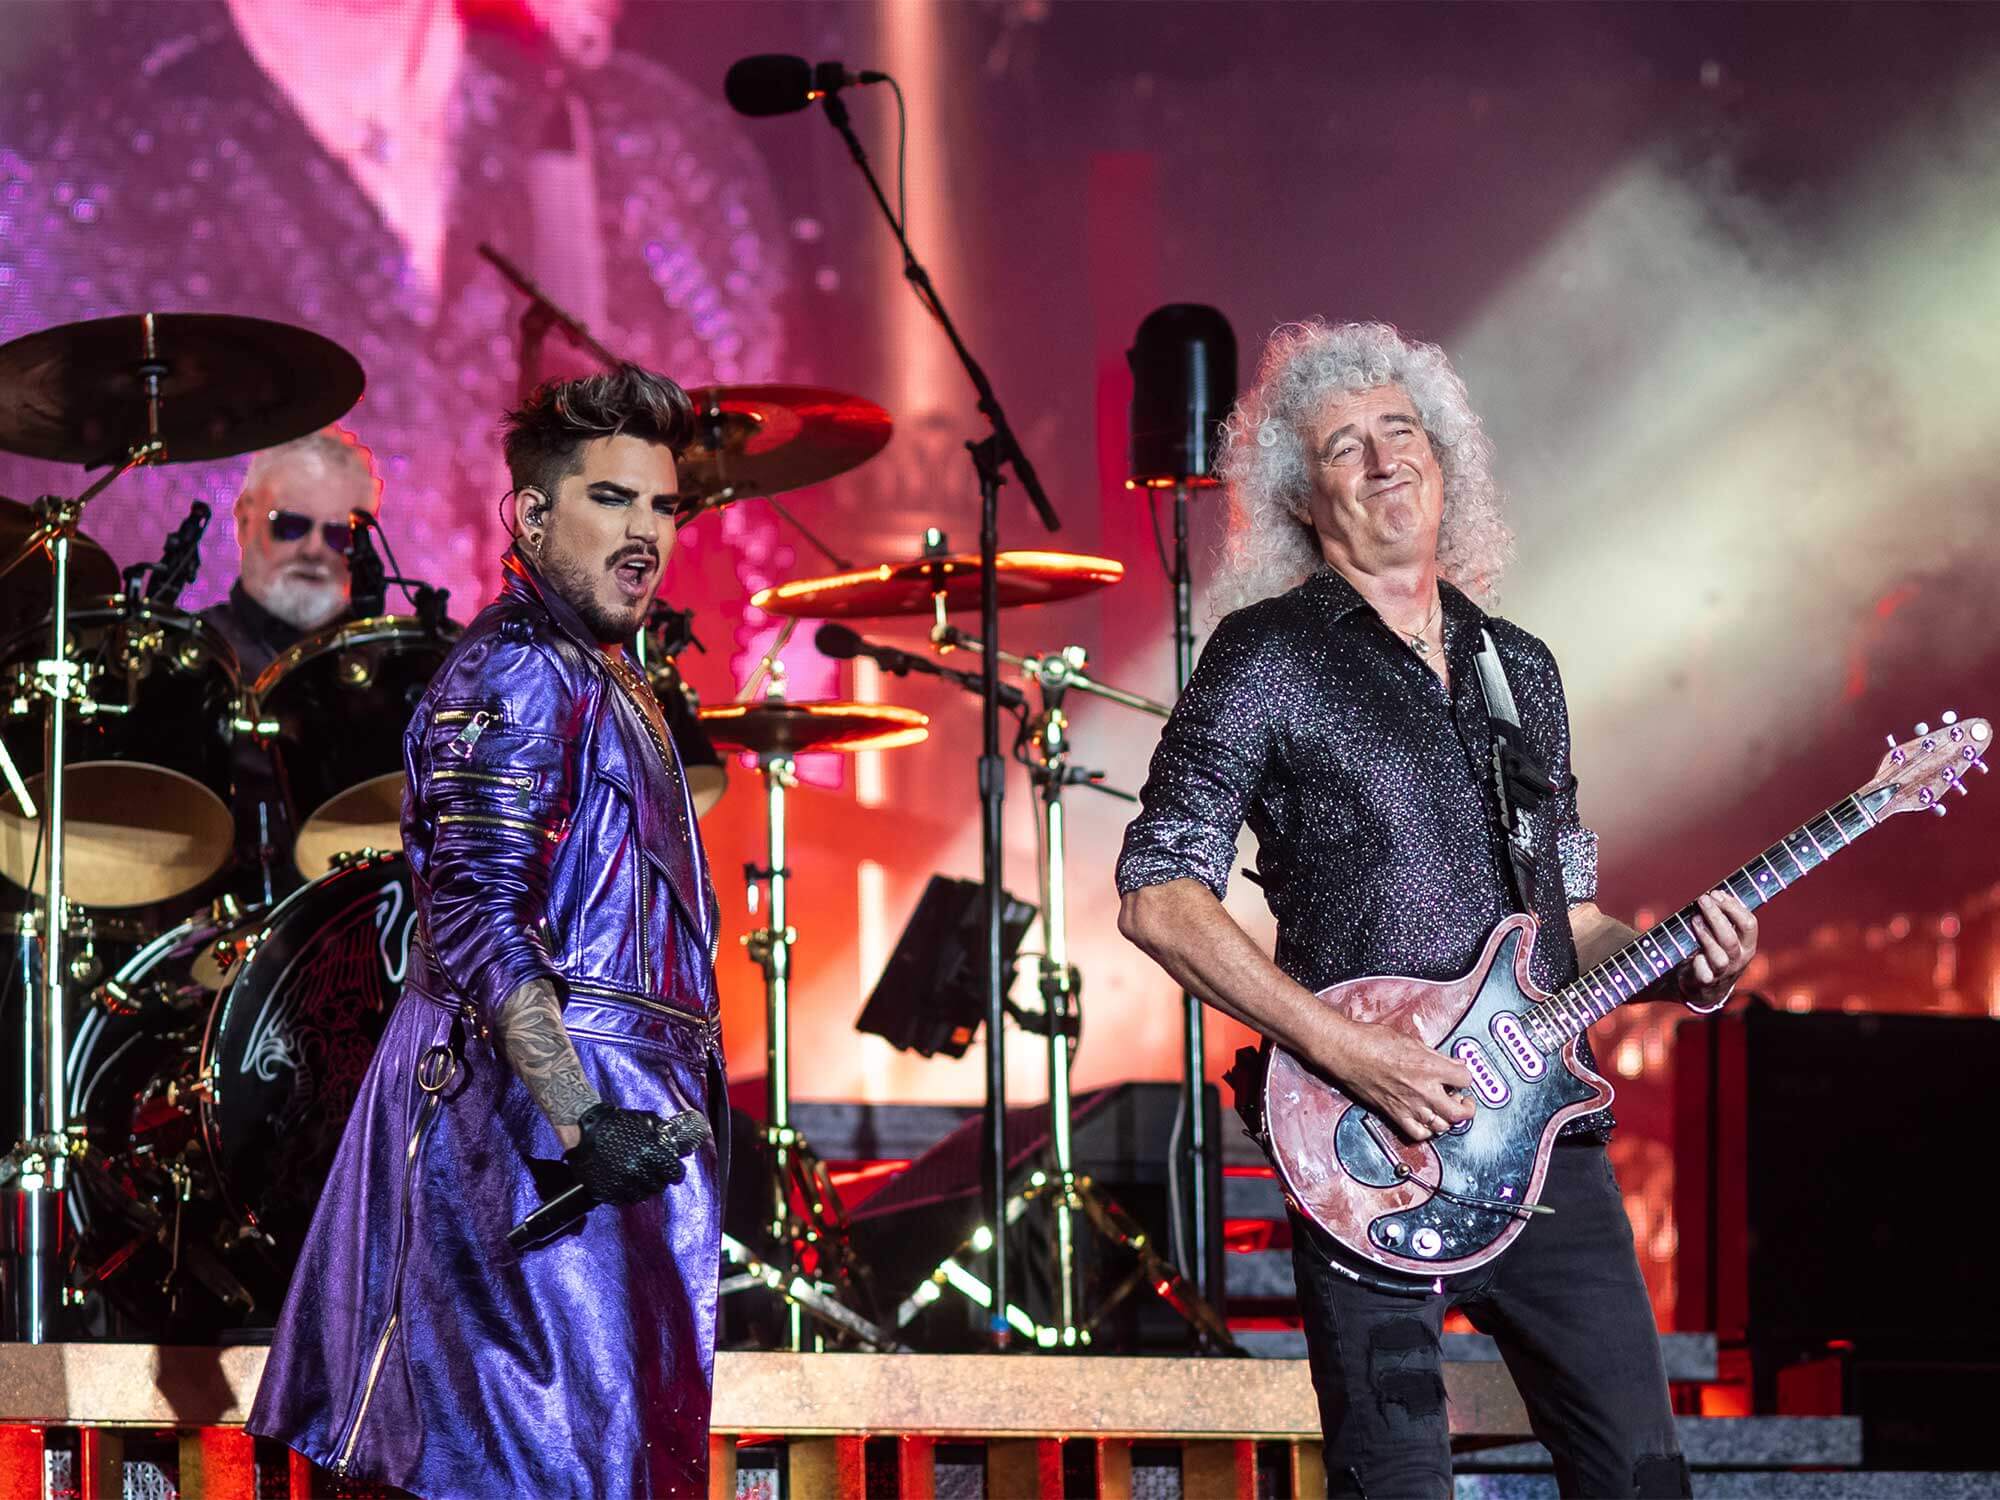 Queen’s Roger Taylor on the band’s difficulty writing new music “Brian